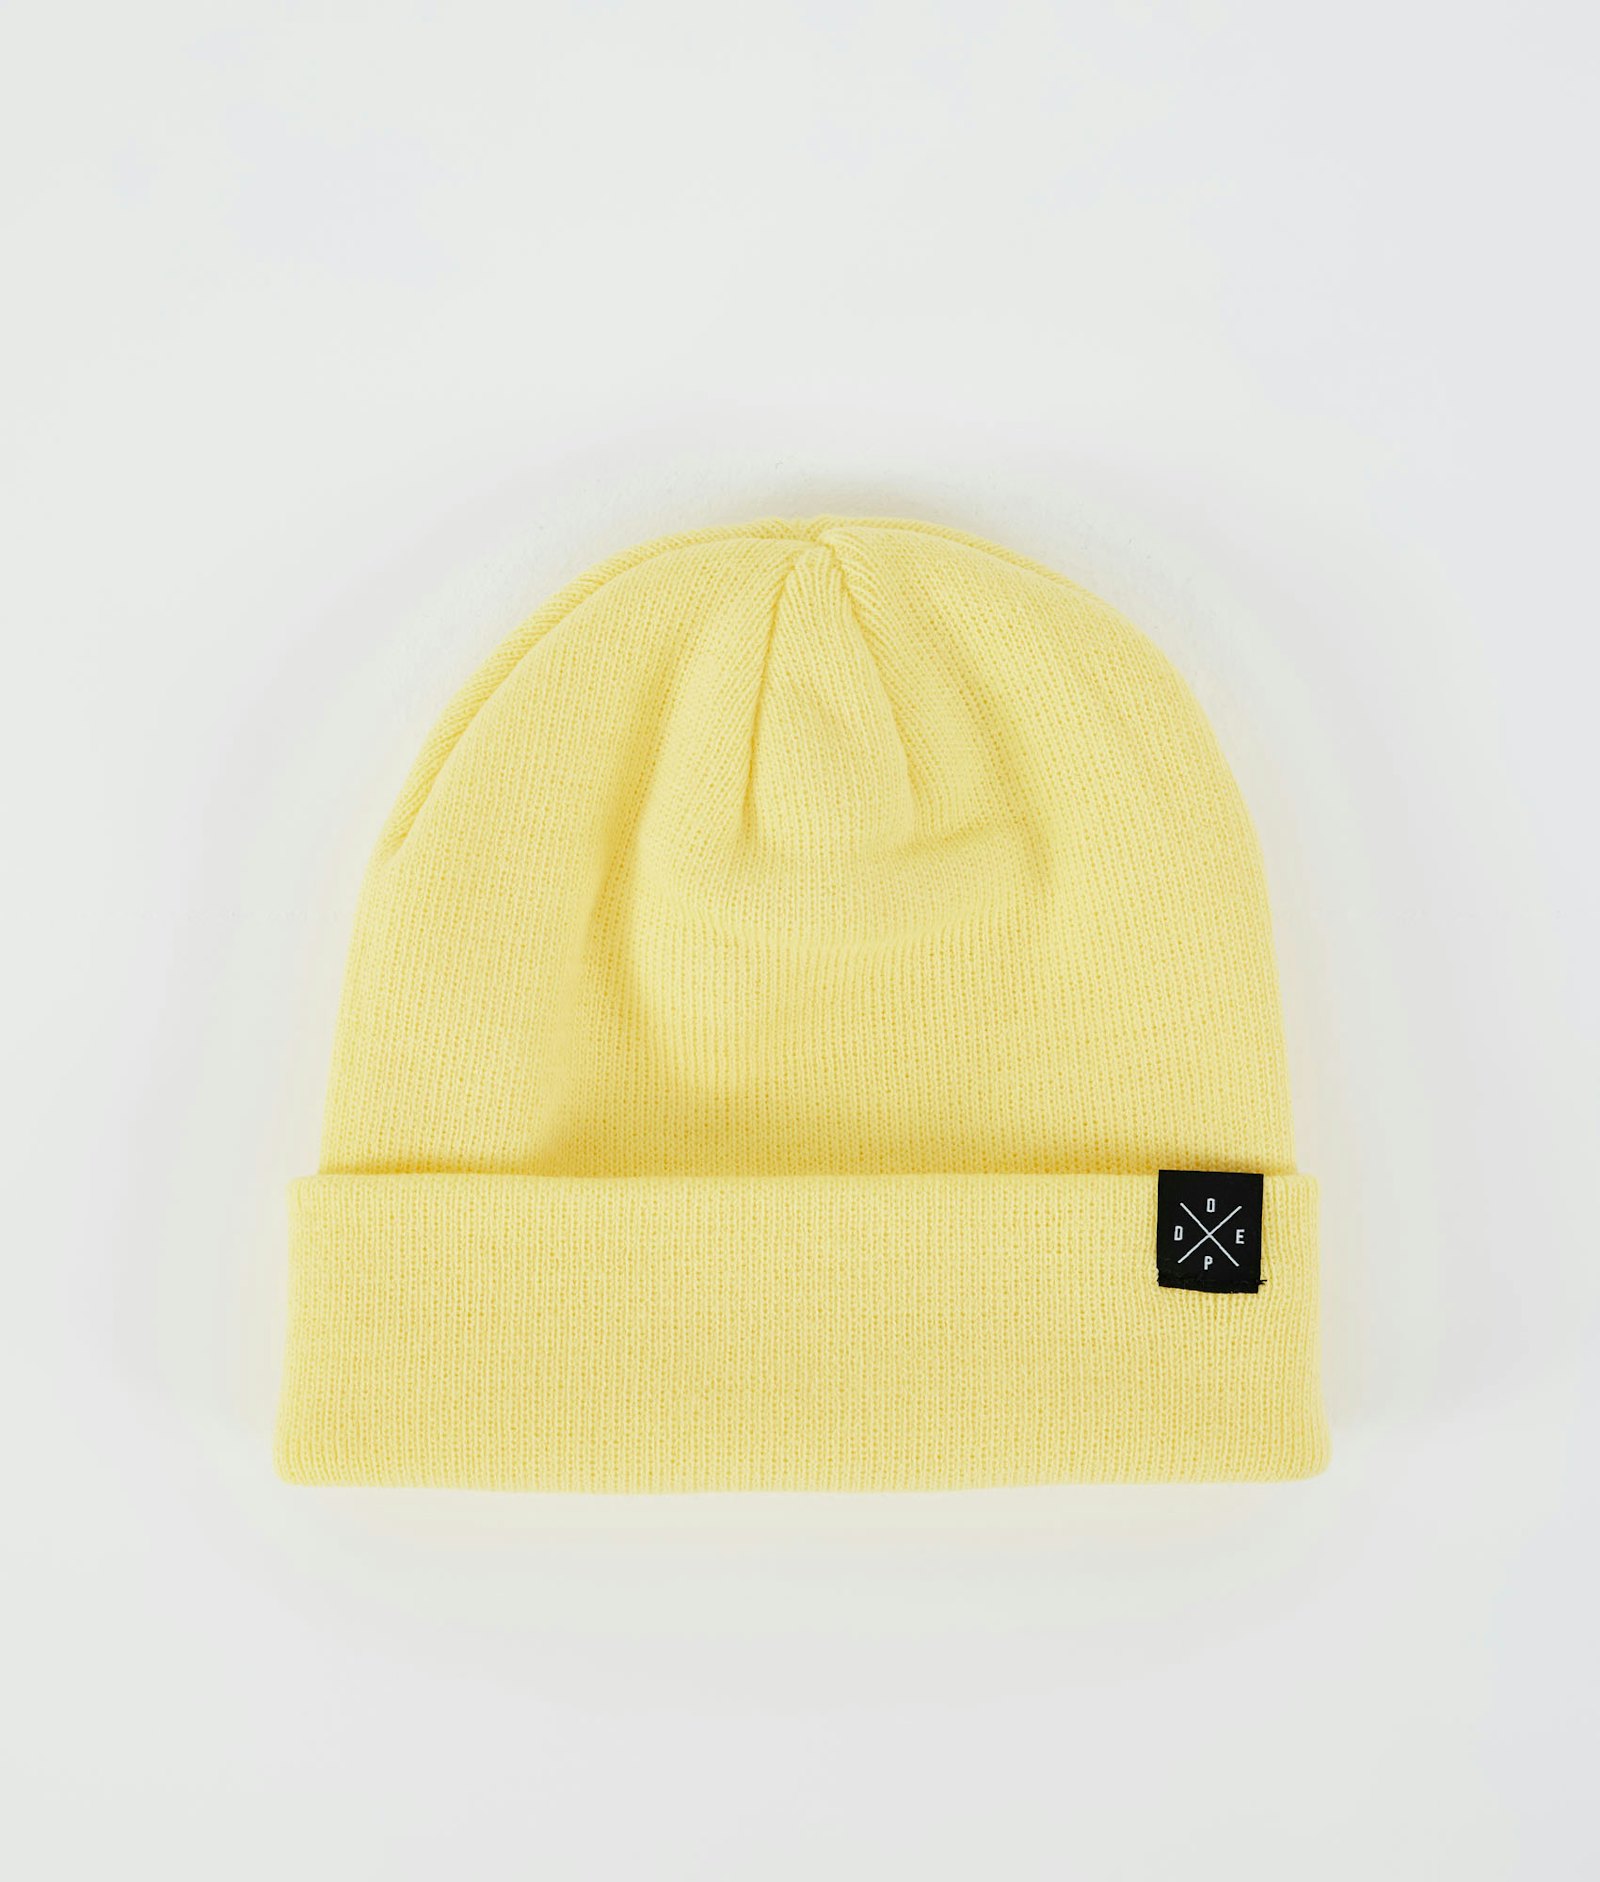 Dope Solitude 2021 Beanie Faded Yellow, Image 1 of 4